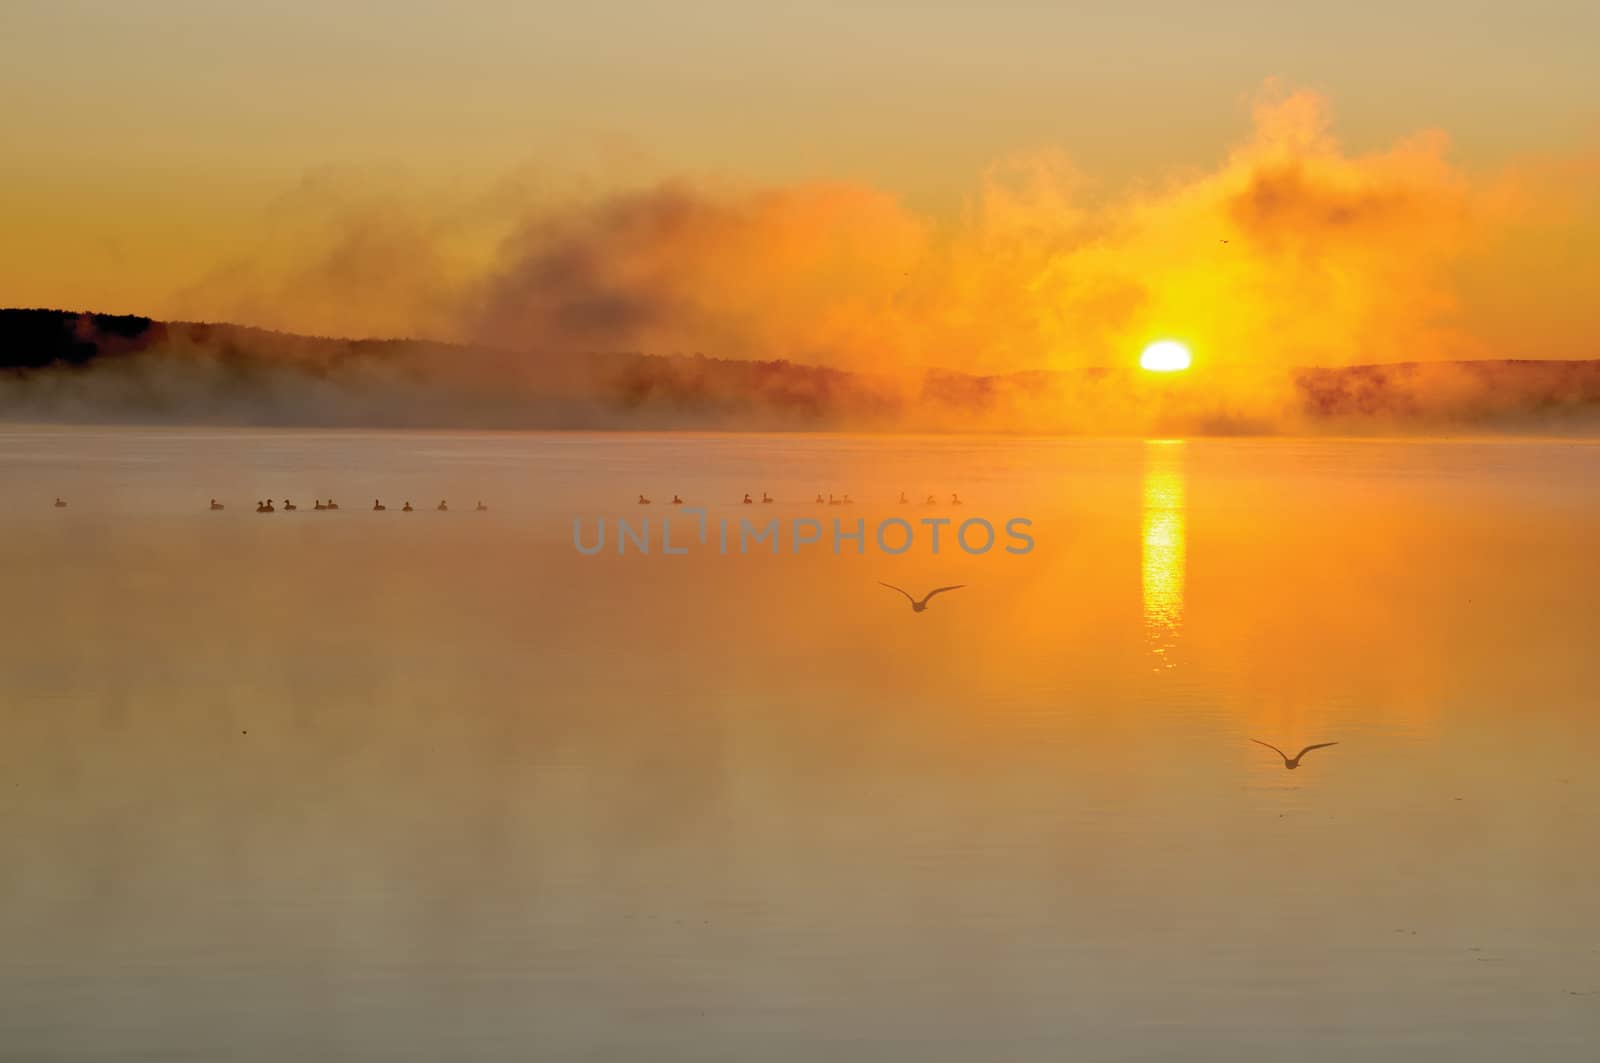 Misty sunrise on a lake, with bird silhouettes